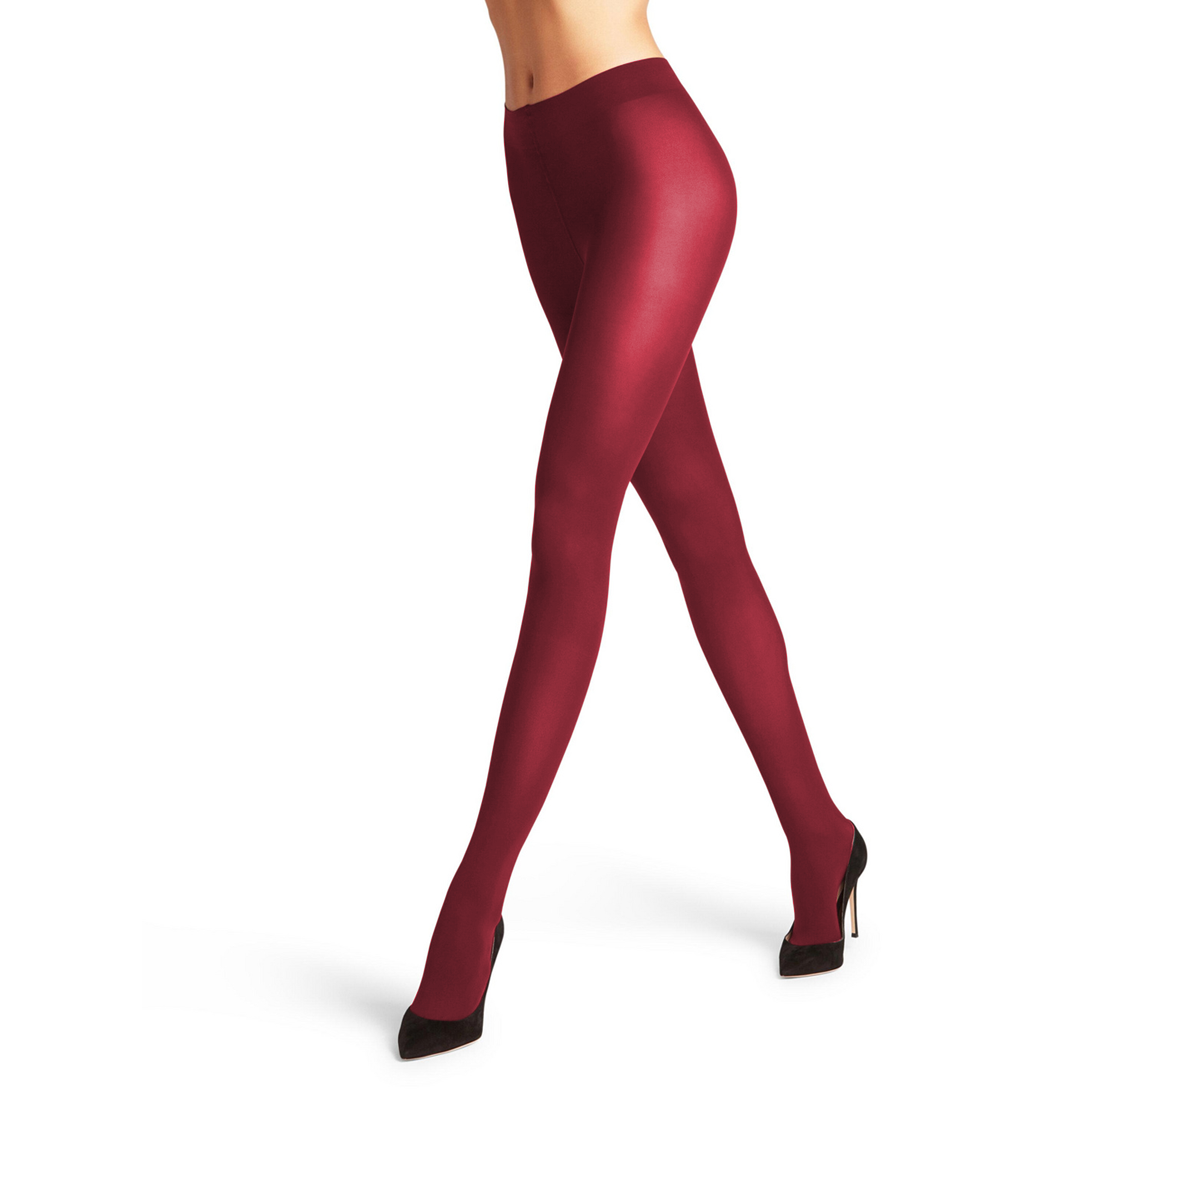 FALKE Perfect Skin Colours tights for women